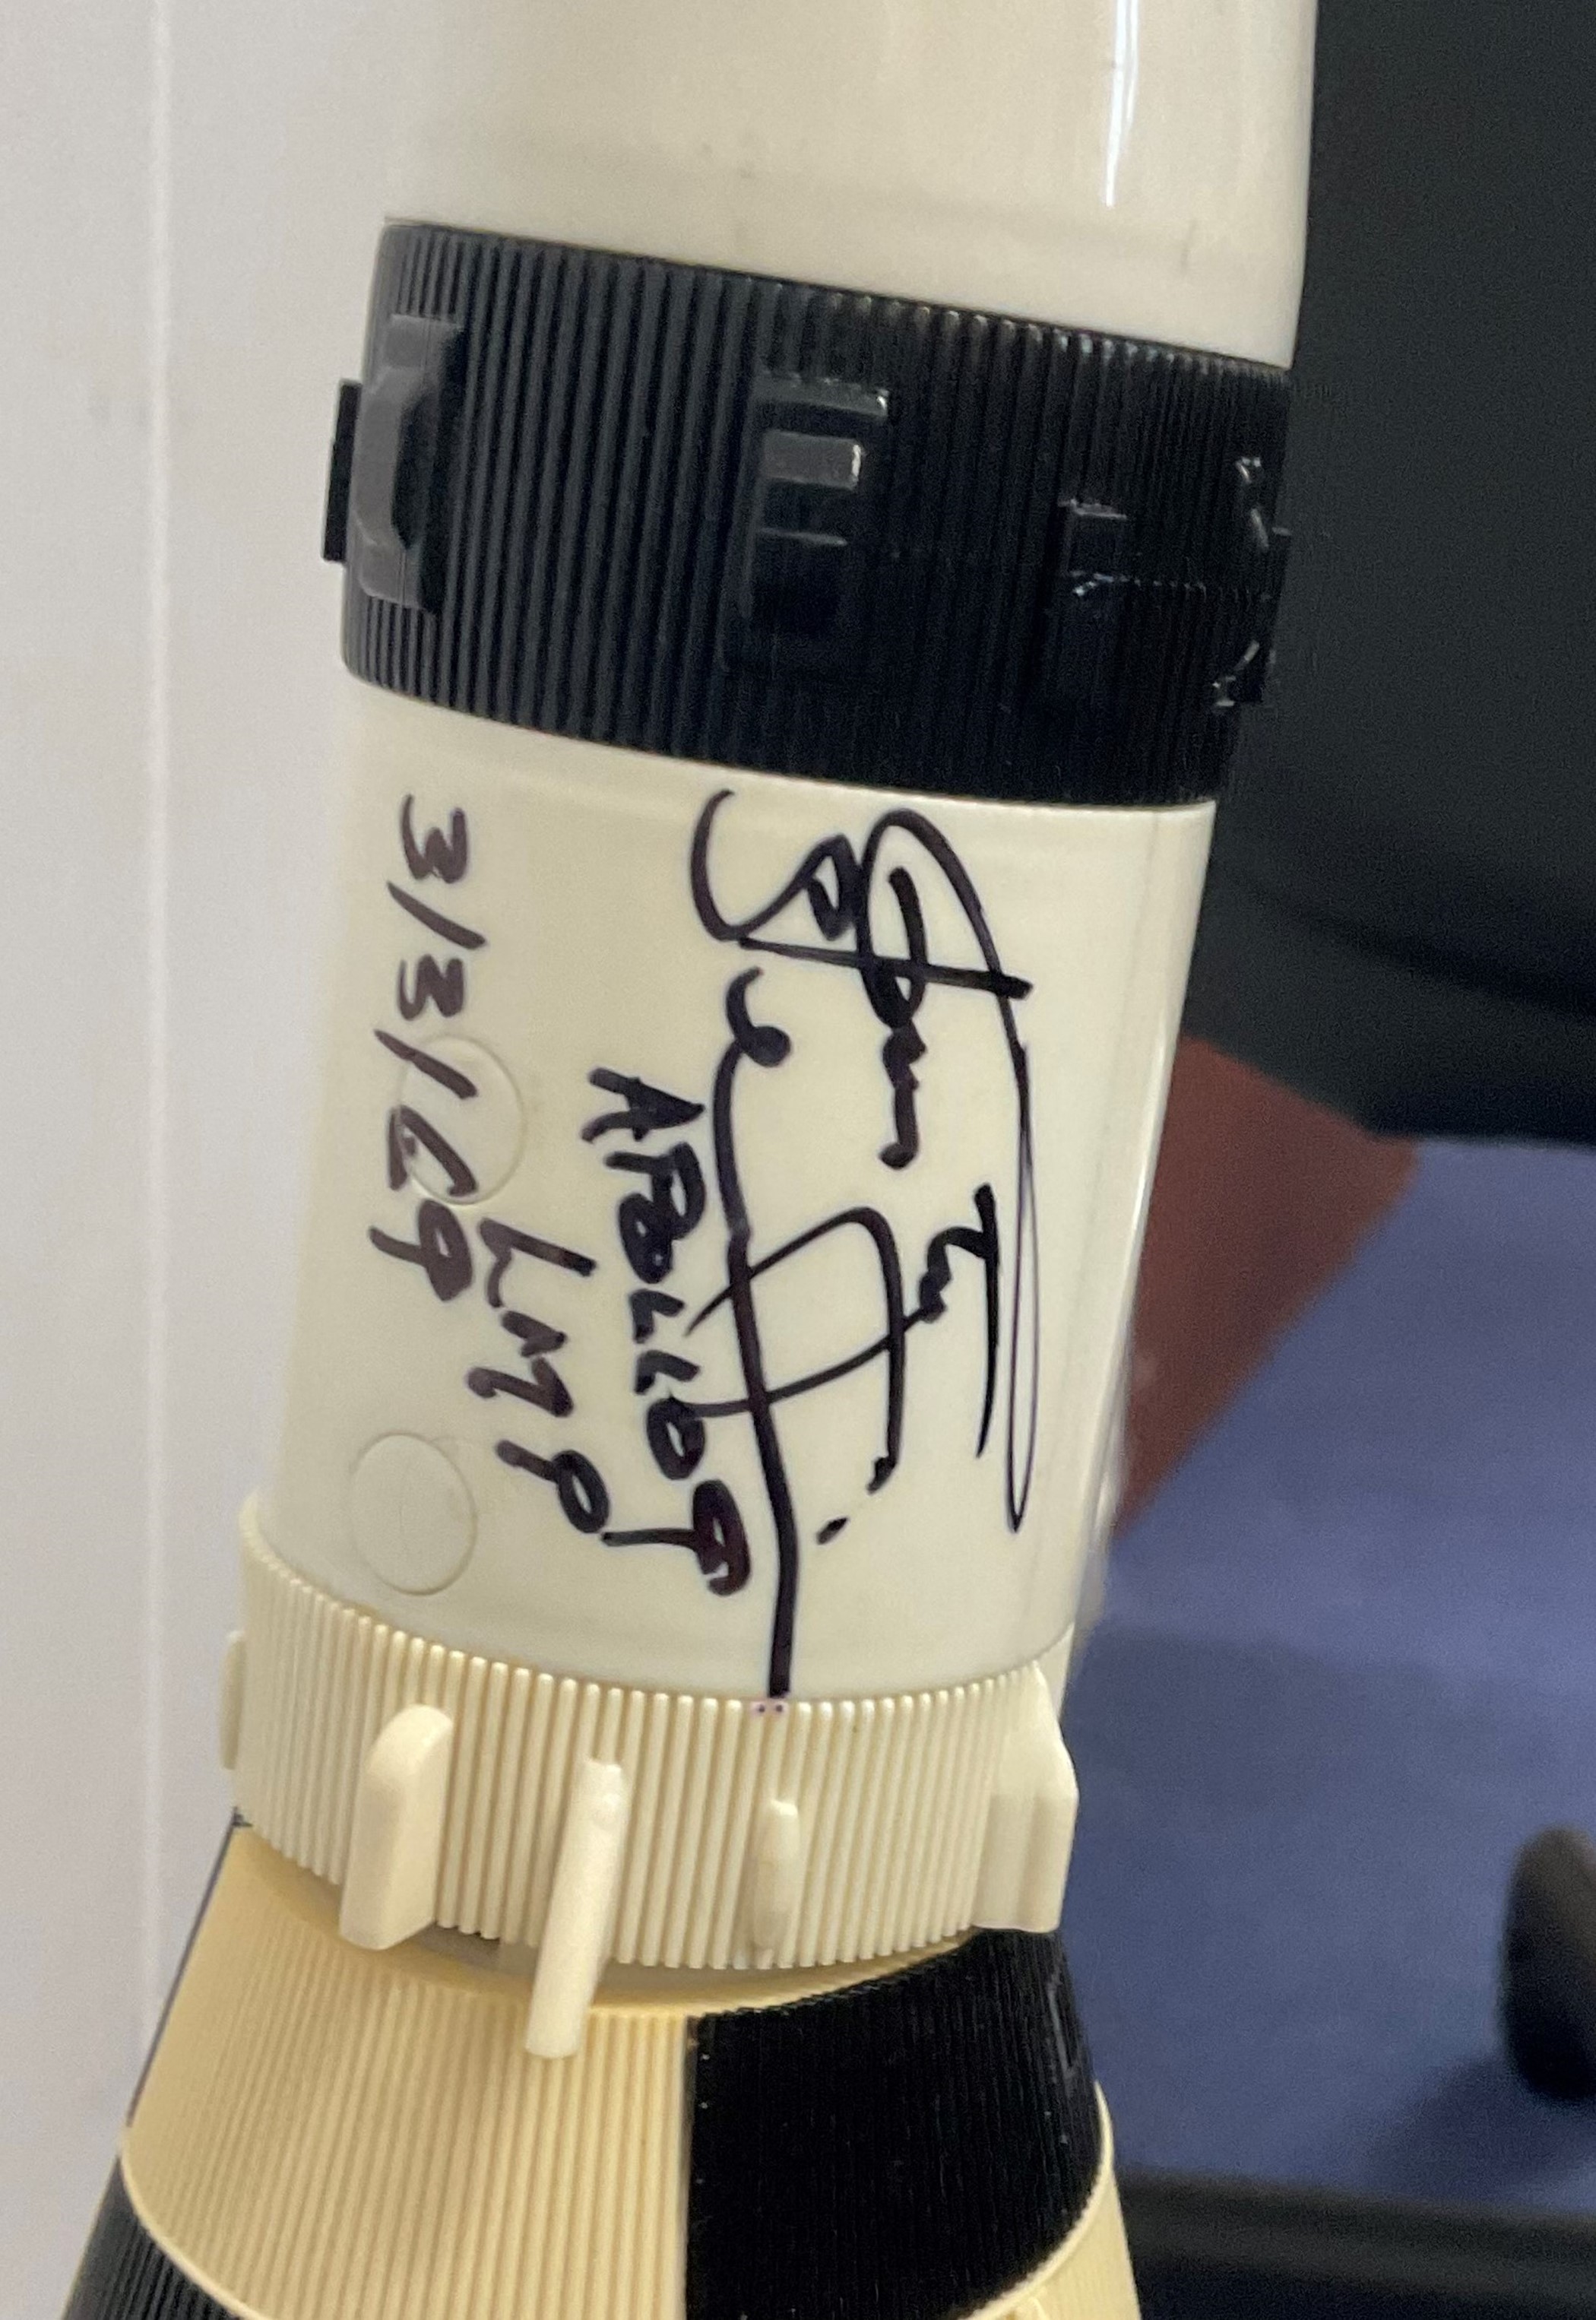 Space Voyagers Saturn 5 rocket model multi signed by Nasa astronauts Charles Drake, Ed Mitchell, - Image 7 of 7